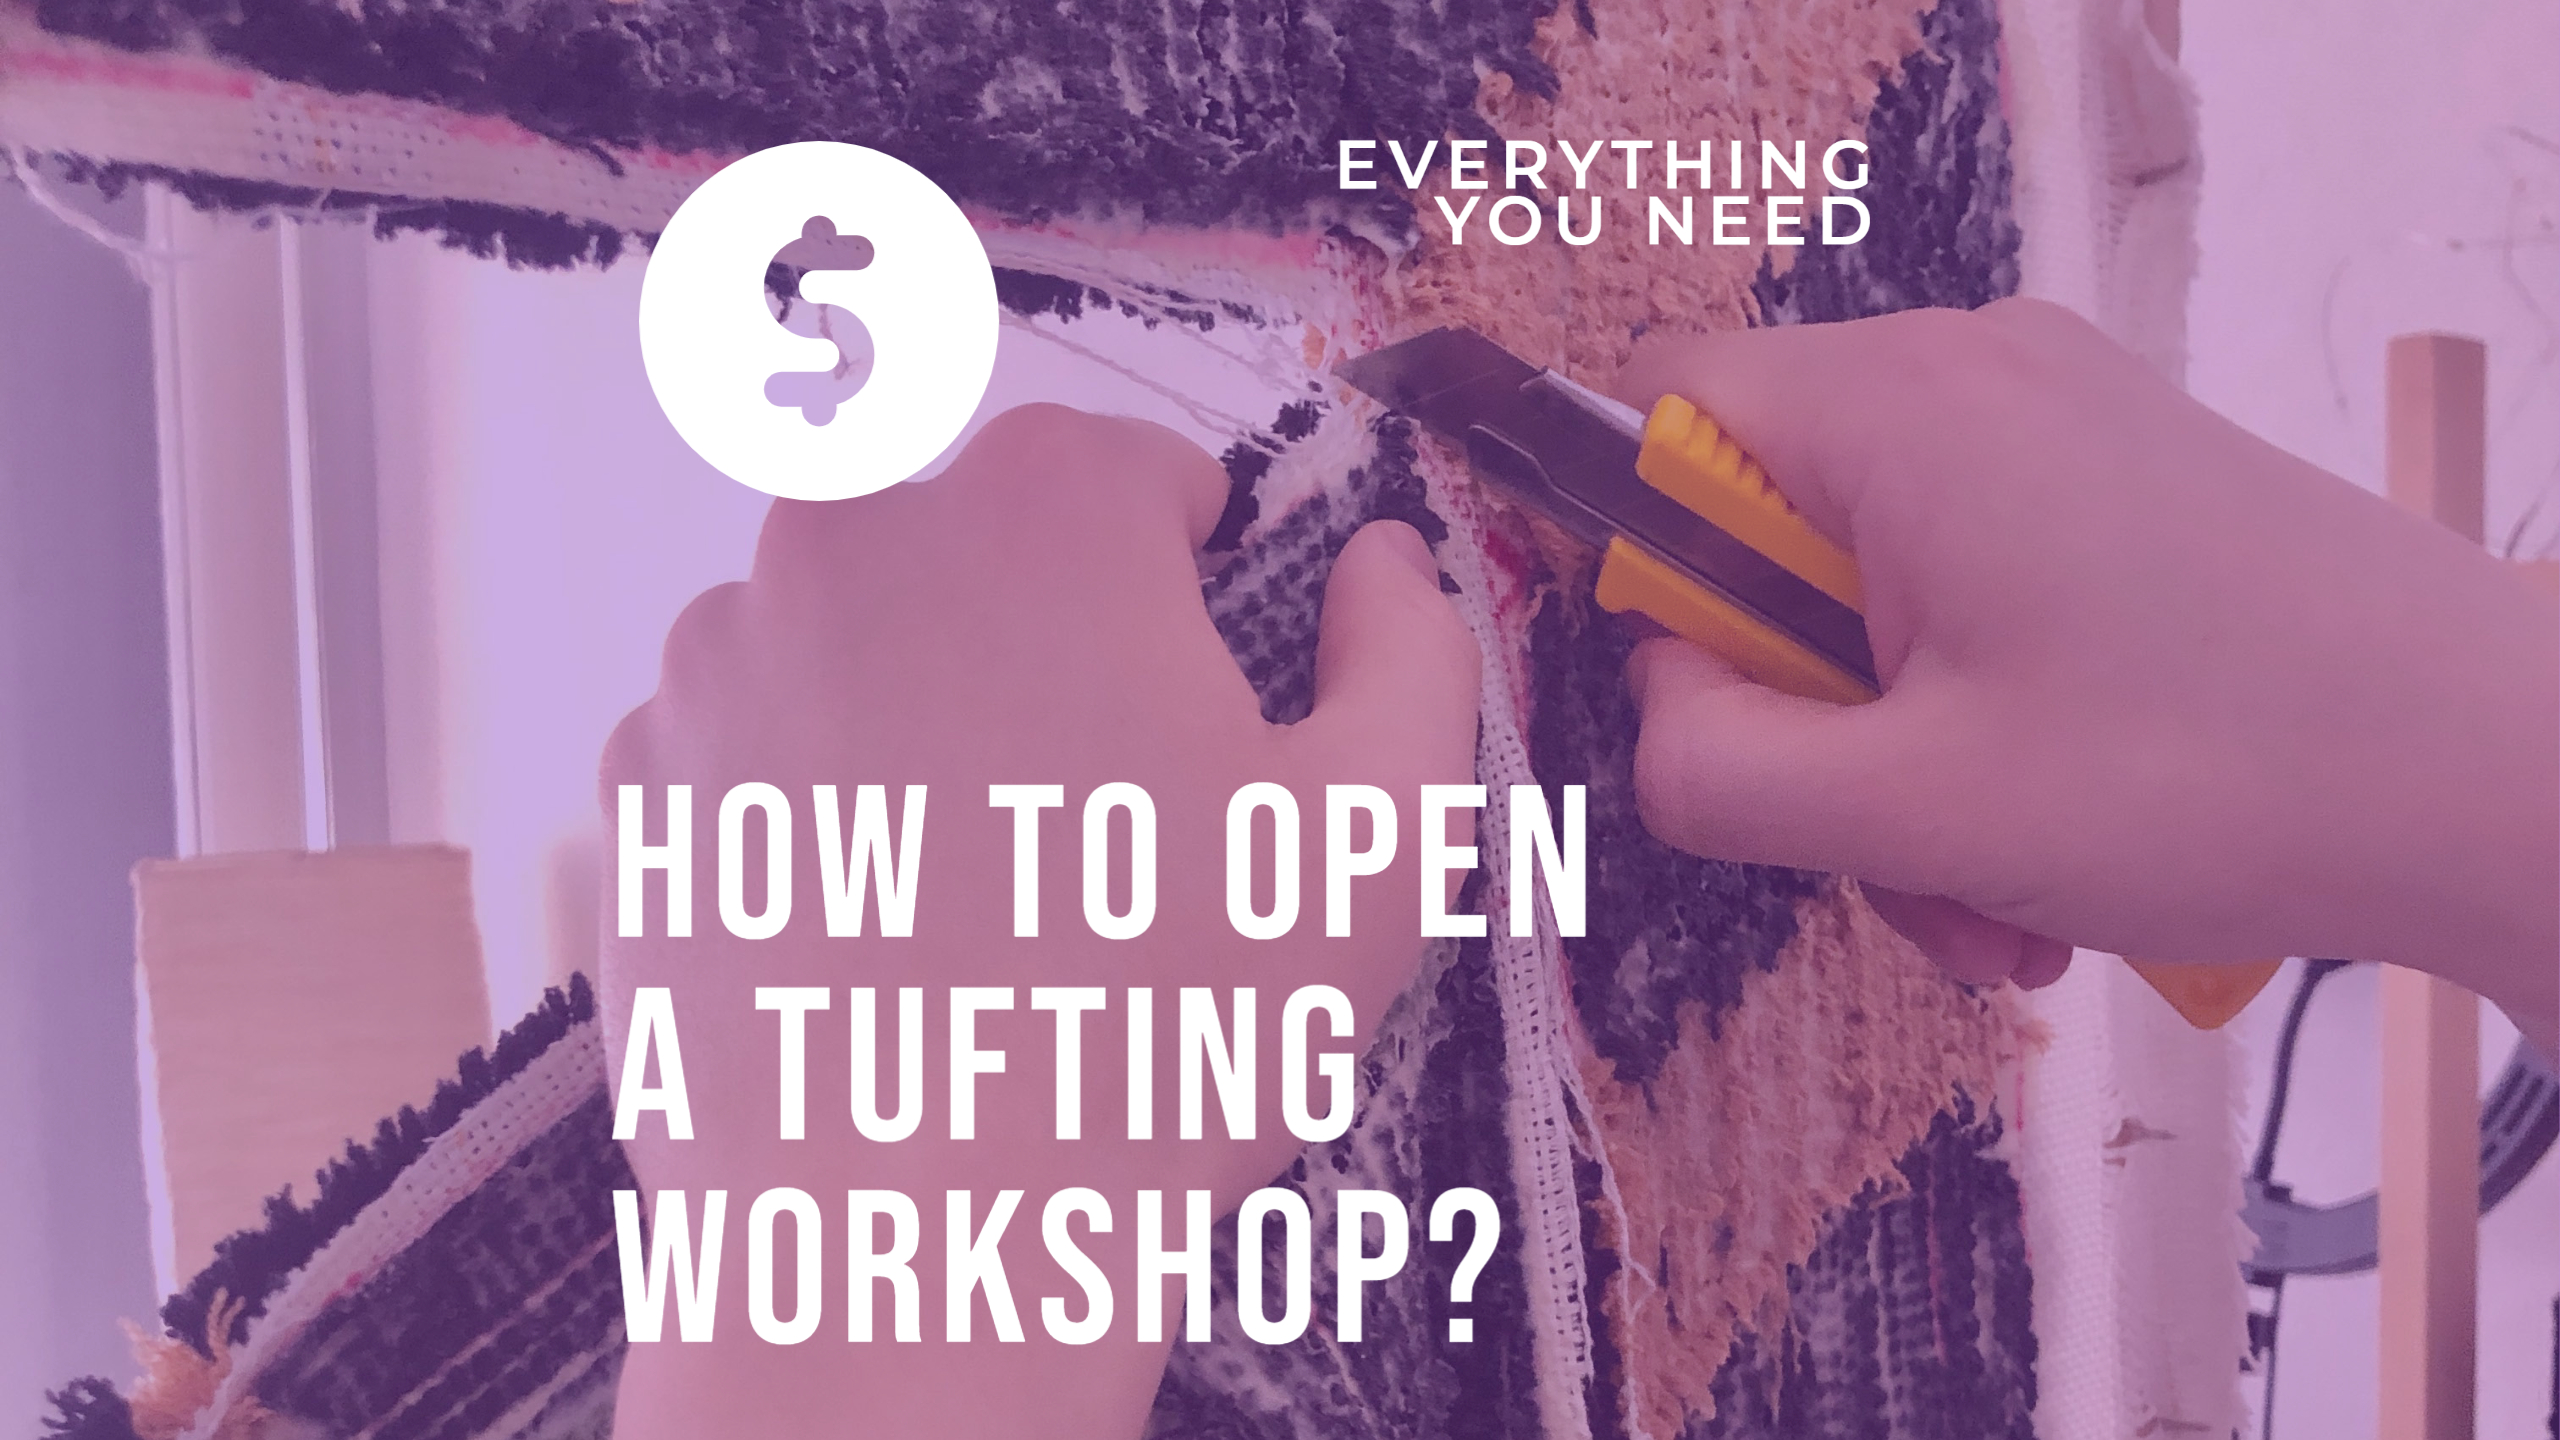 How To Open A Tufting Workshop? EVERYTHING YOU NEED